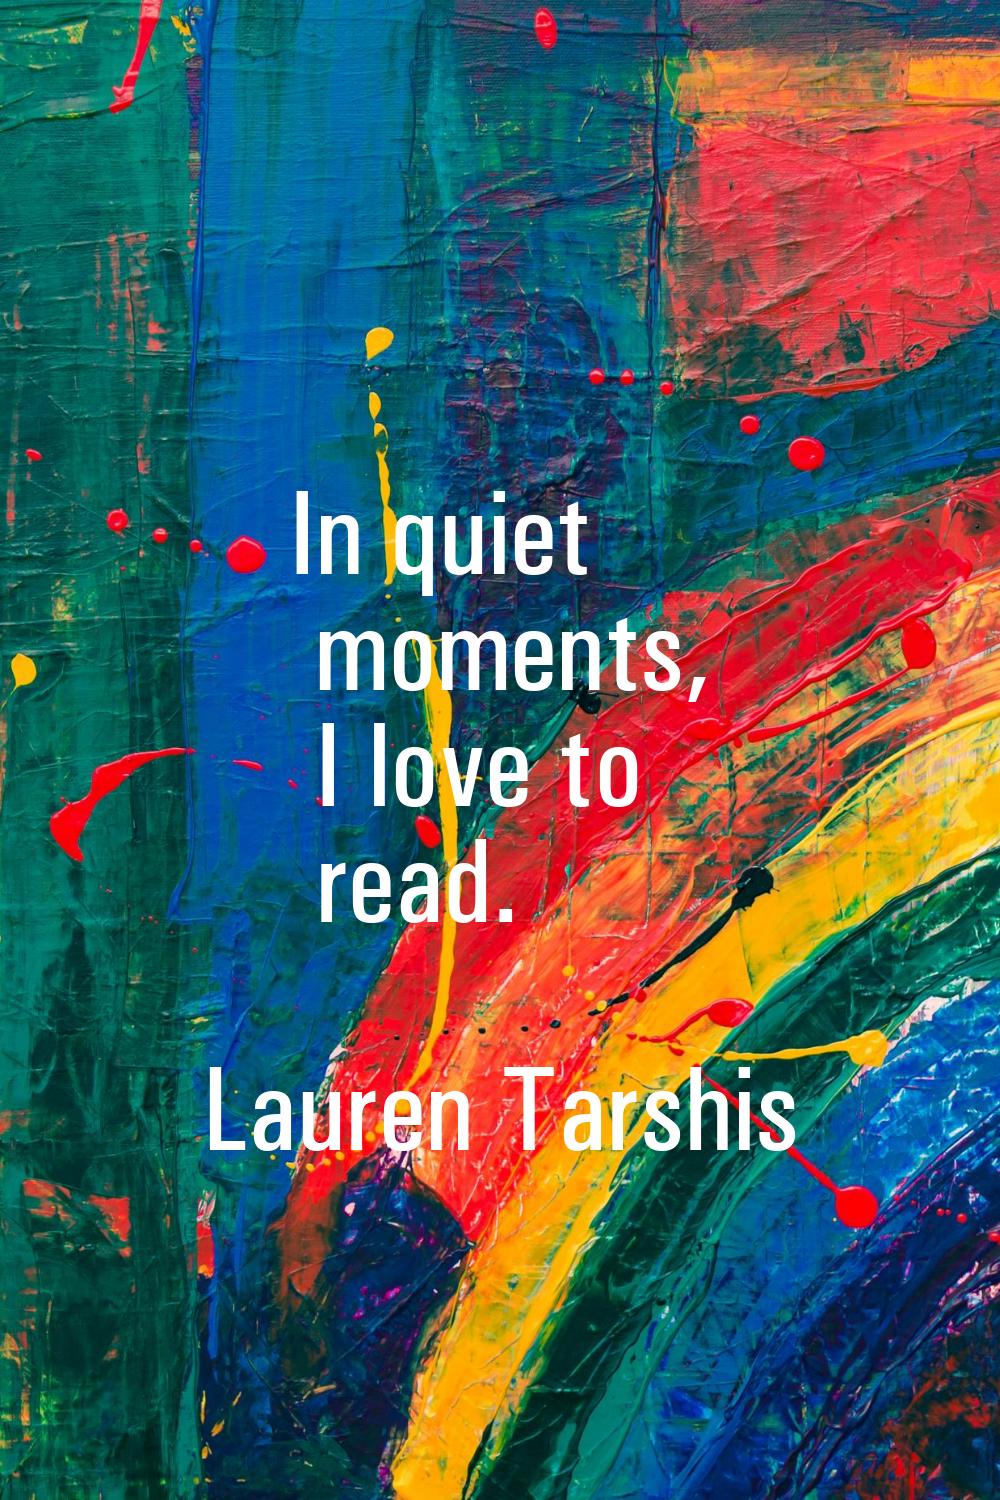 In quiet moments, I love to read.